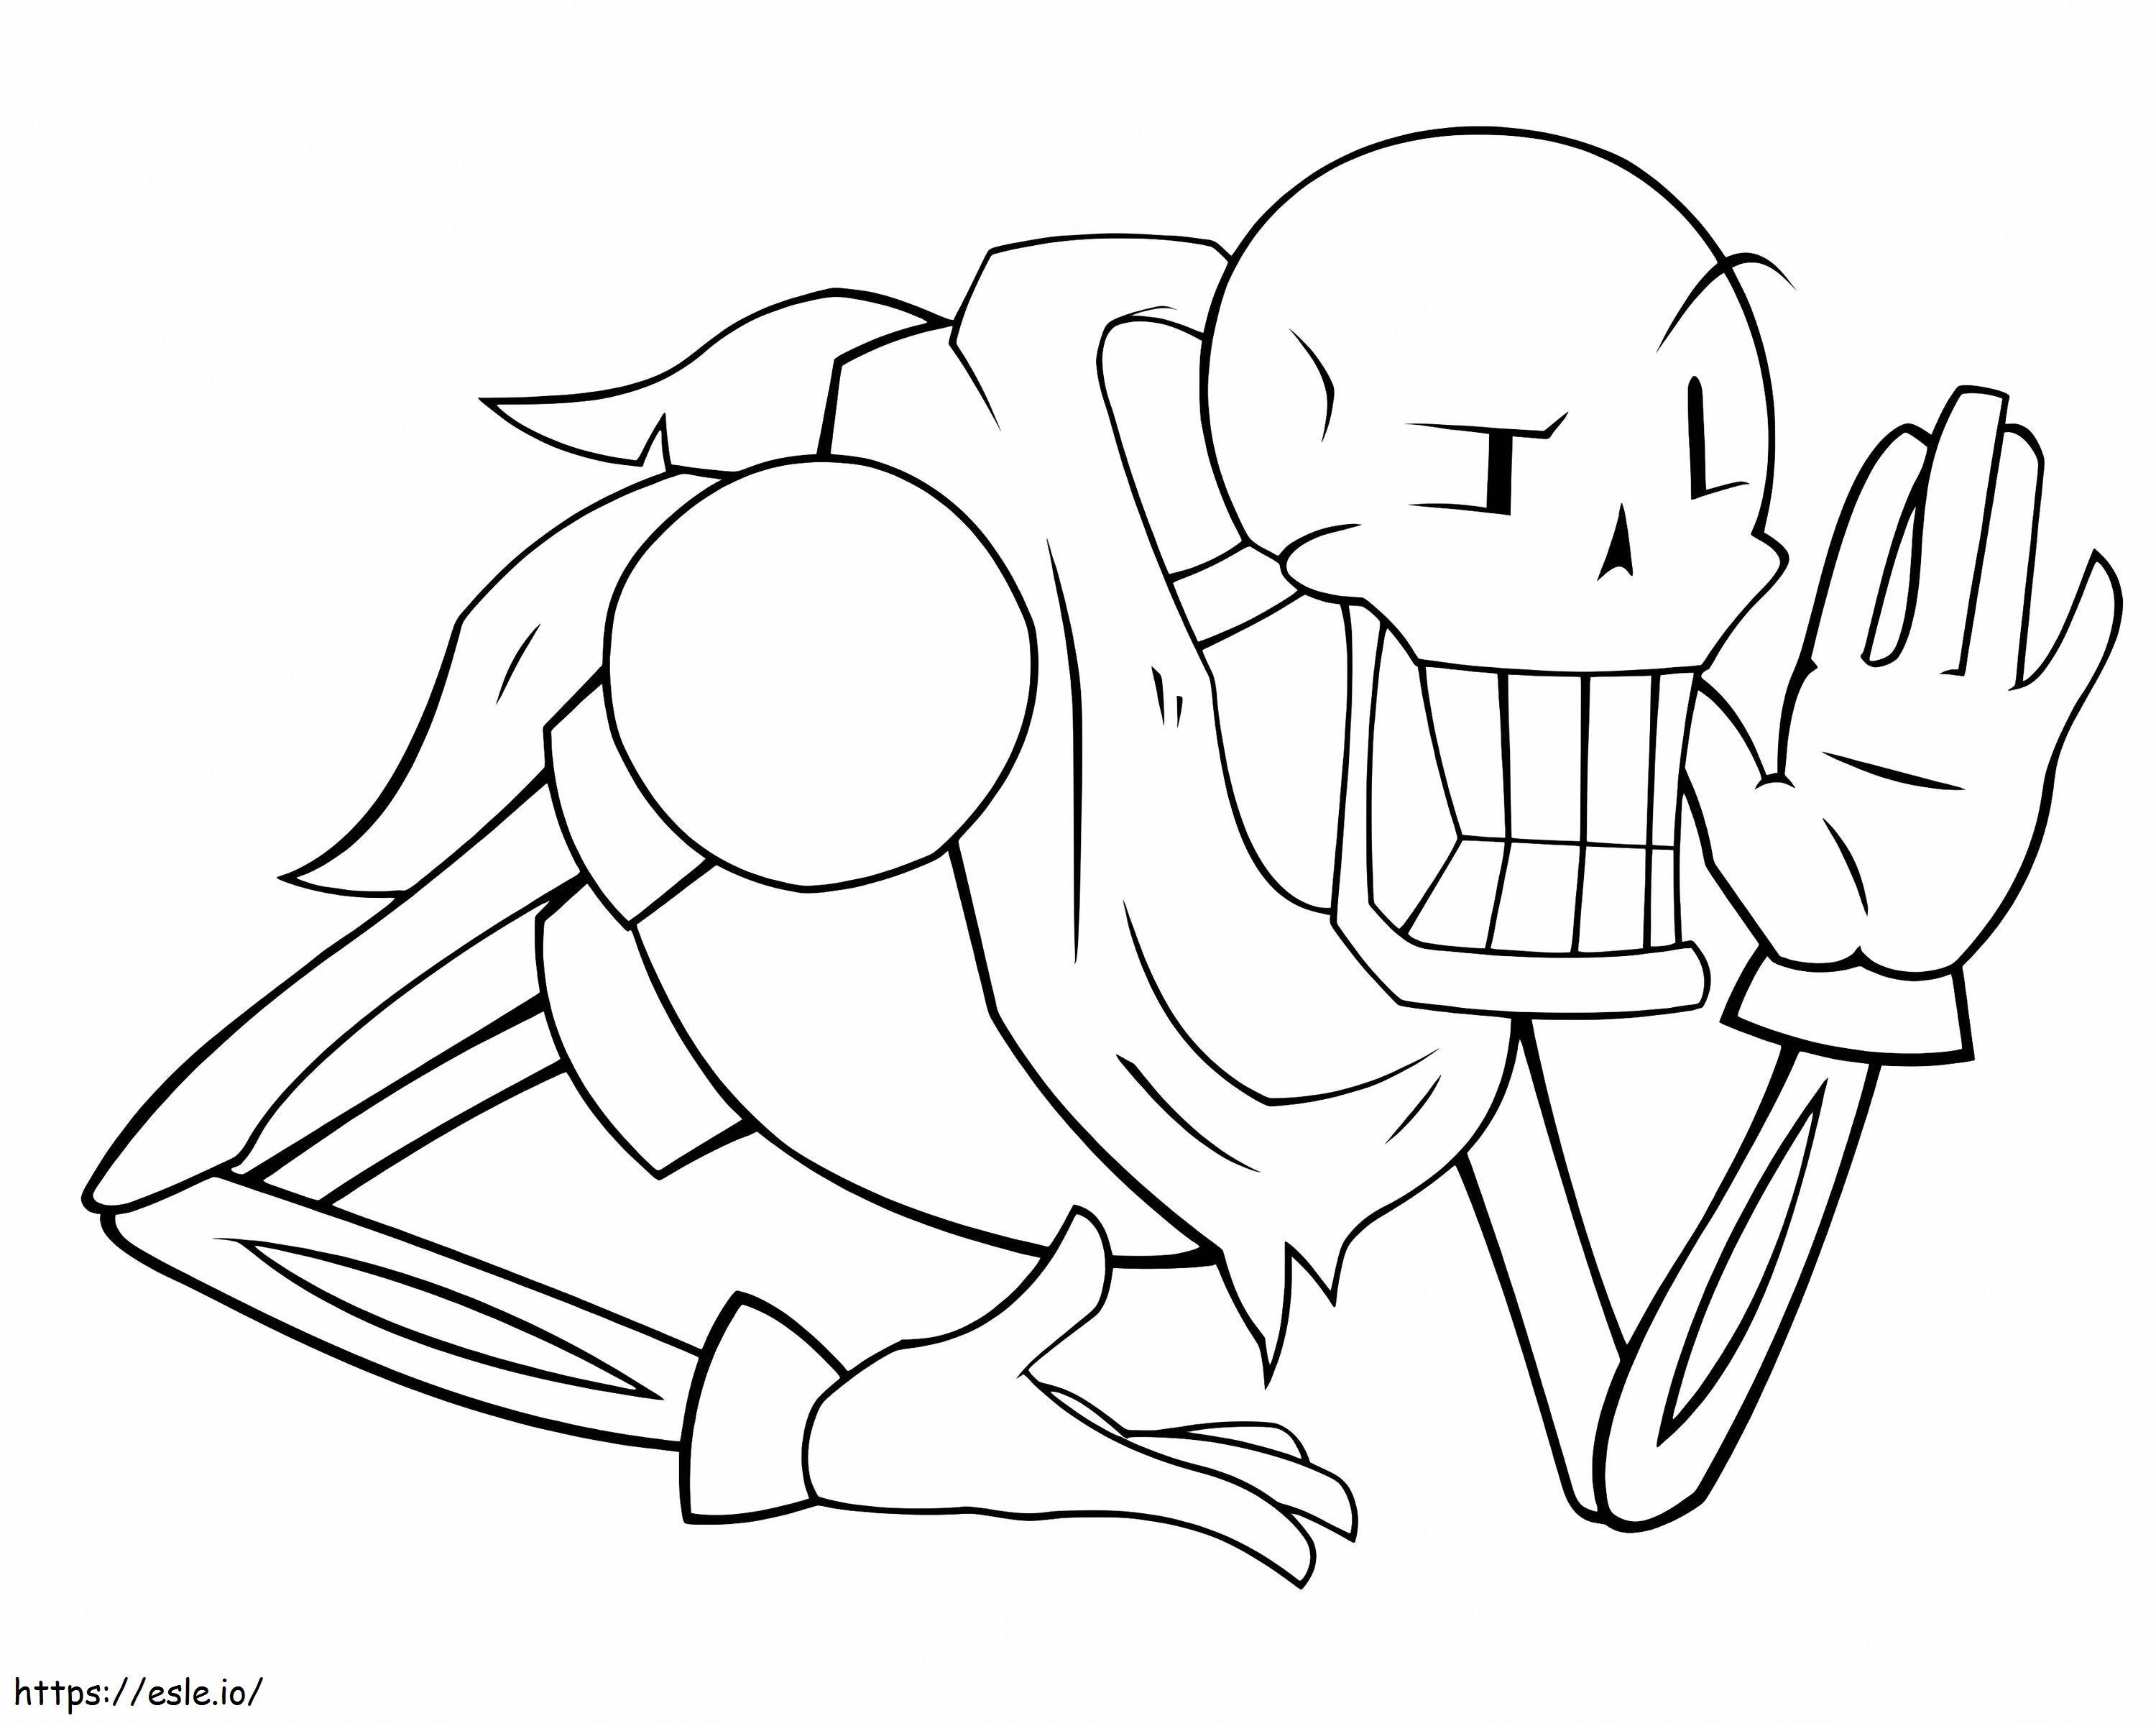 Fun Papyrus coloring page